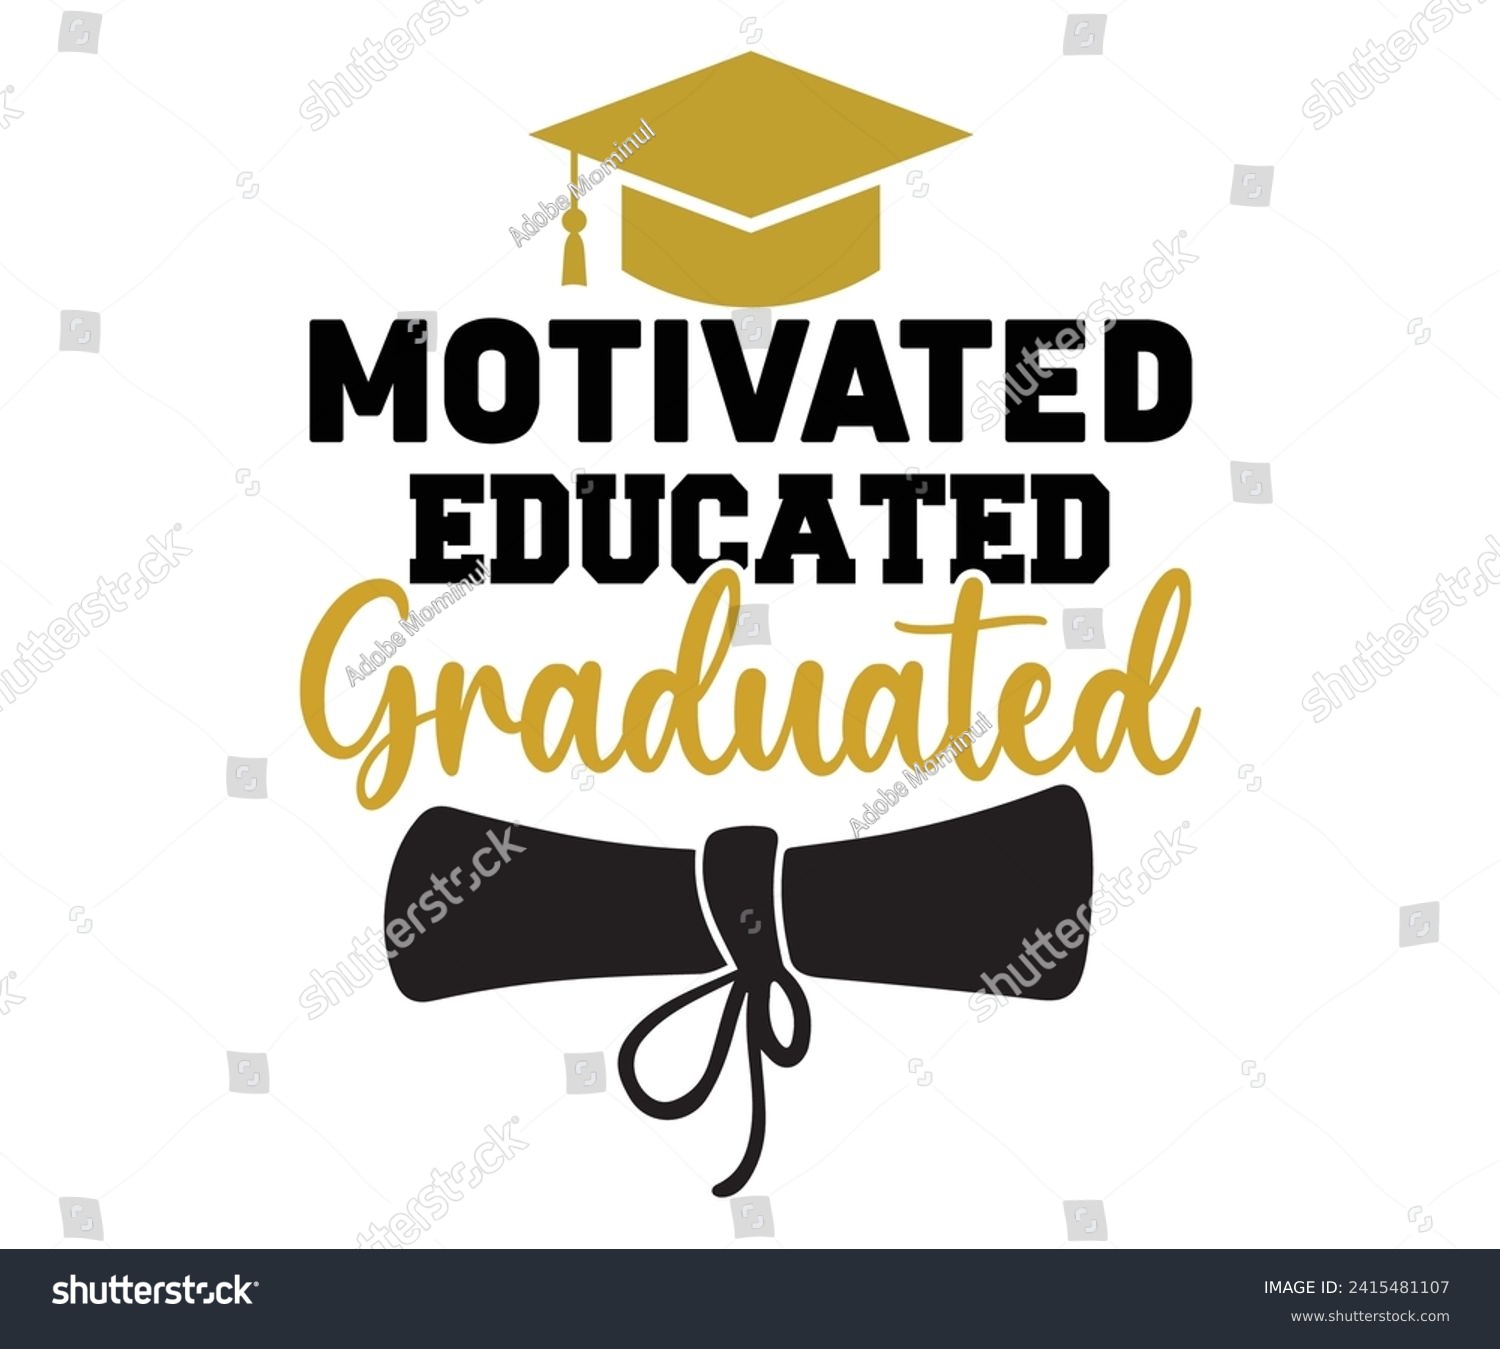 SVG of Motivated Educated Graduated Svg,Graduation Svg,Senior Svg,Graduate T shirt,Graduation cap,Graduation 2024 Shirt,Family Graduation Svg,Pre-K Grad Shirt,Graduation Qoutes,Graduation Gift Shirt,cut File svg